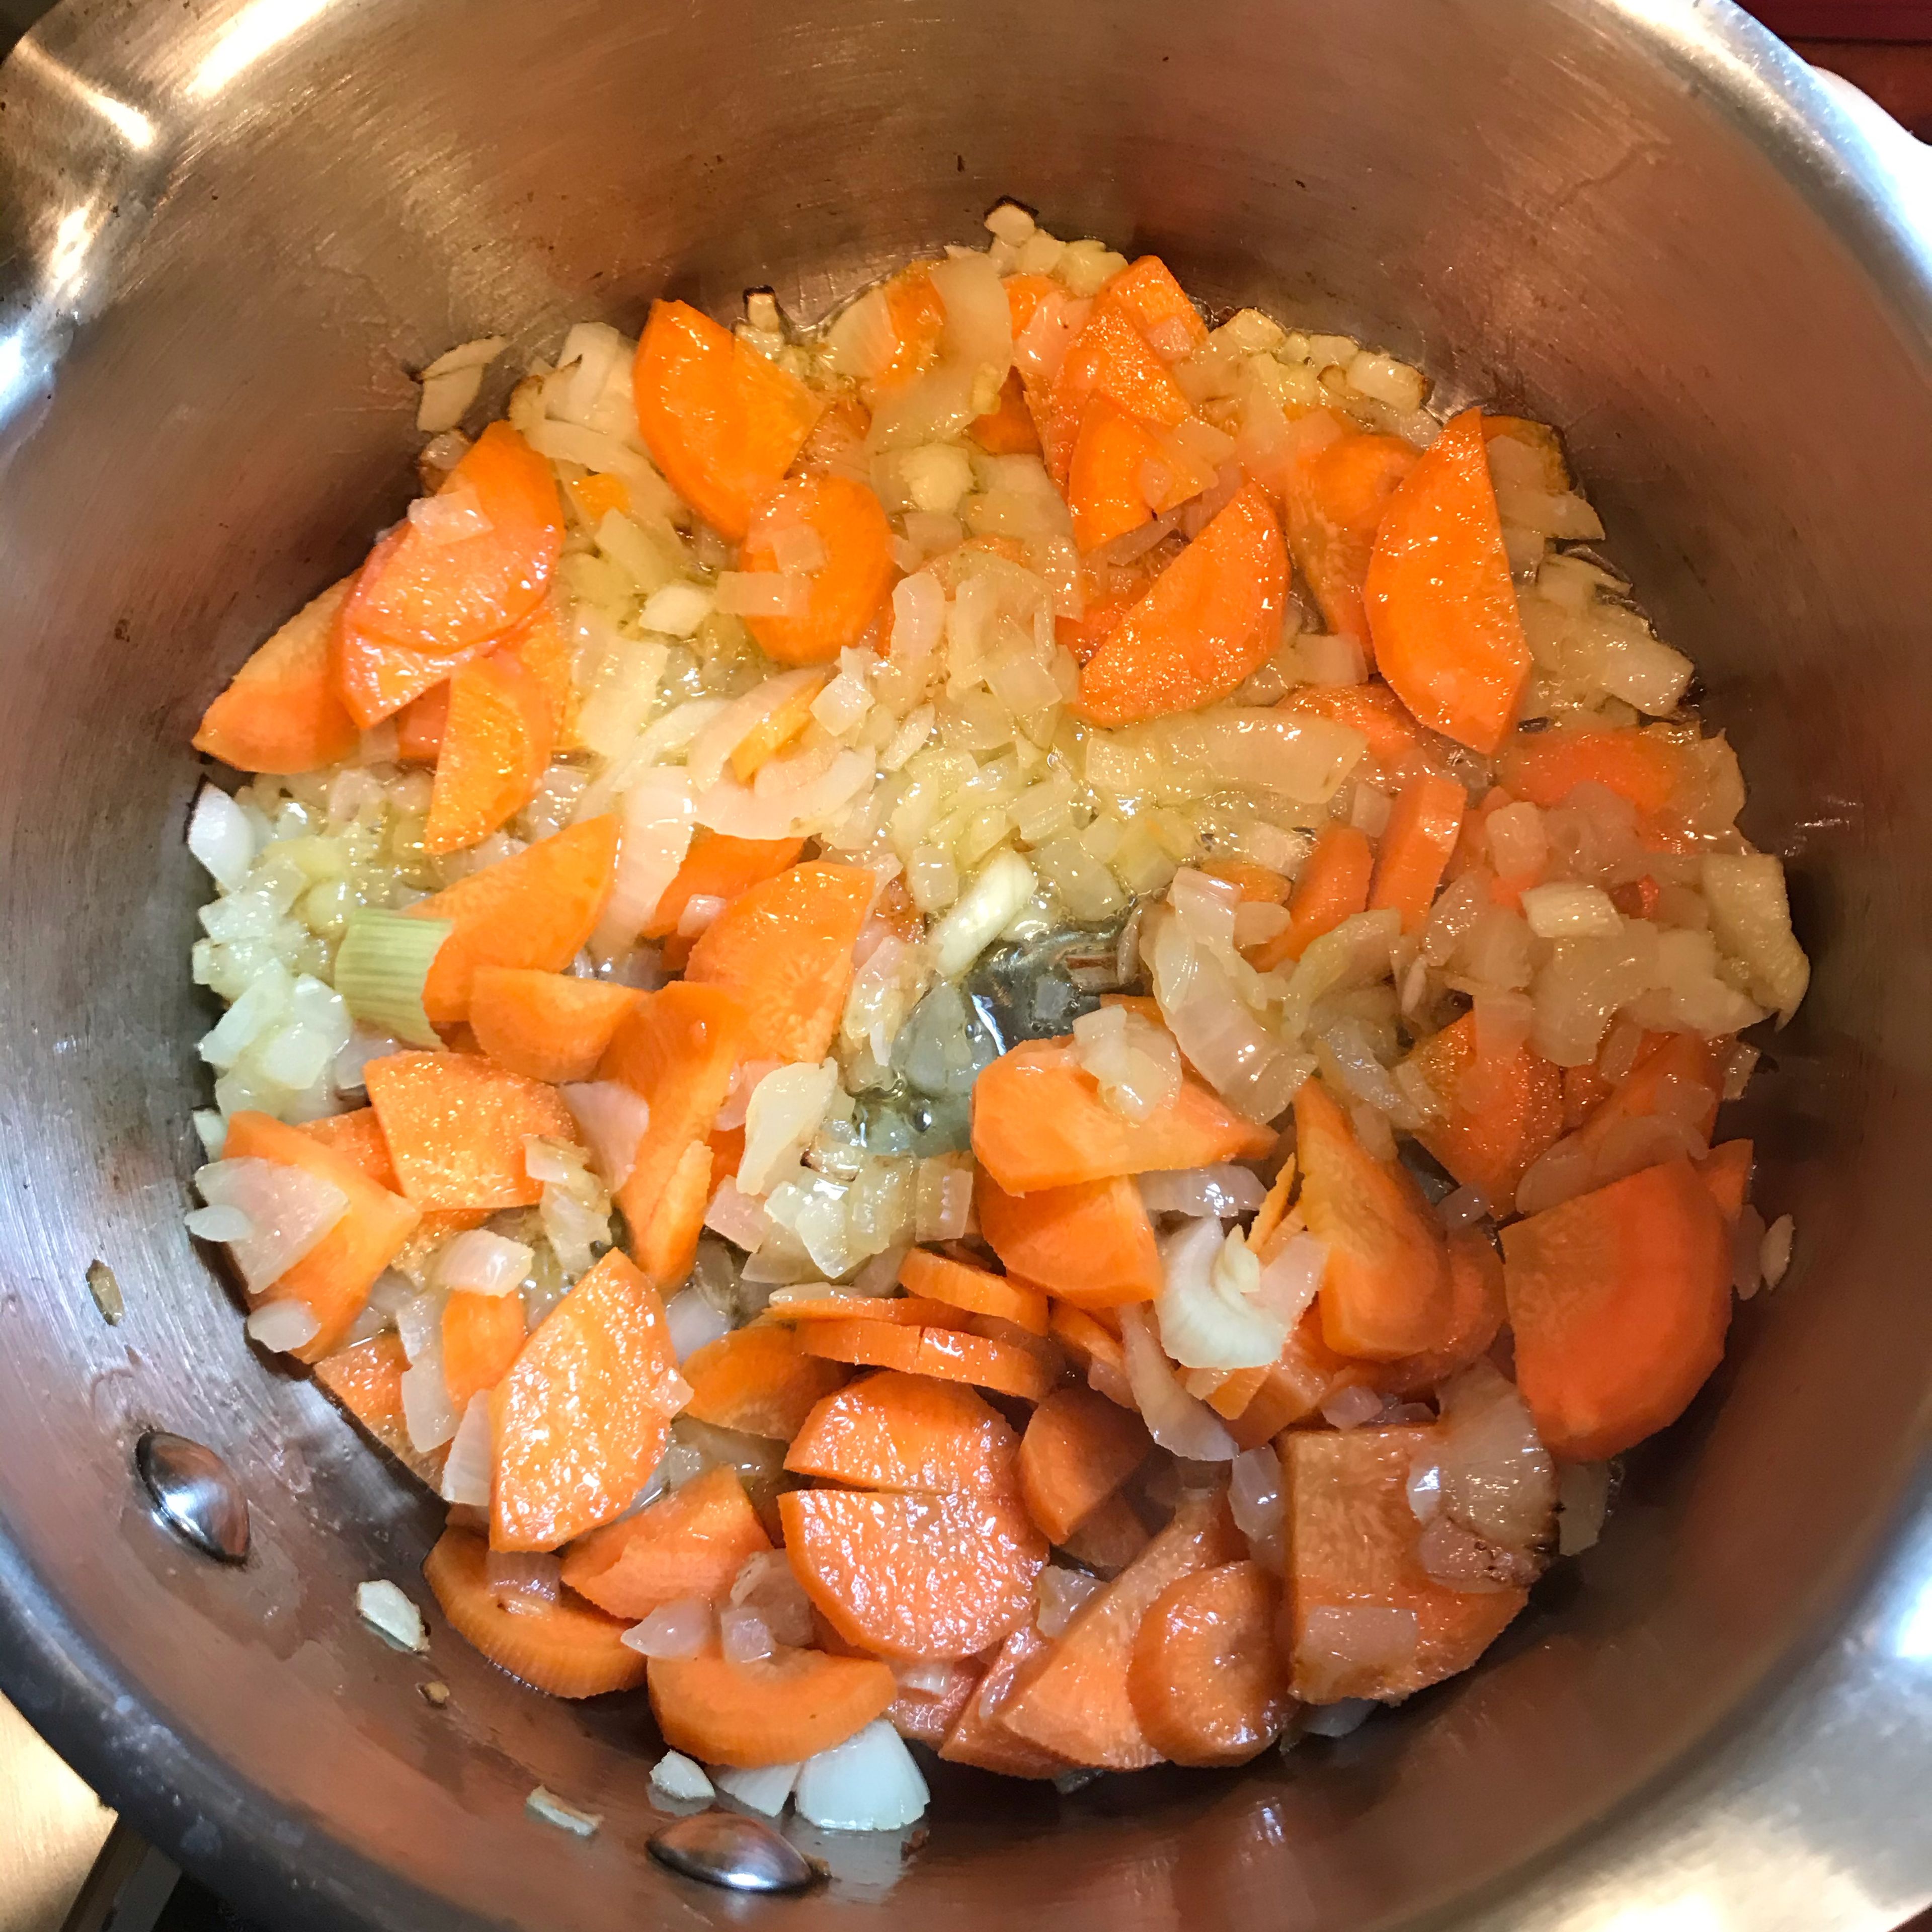 Add the chopped carrots and cook for 5 more minutes